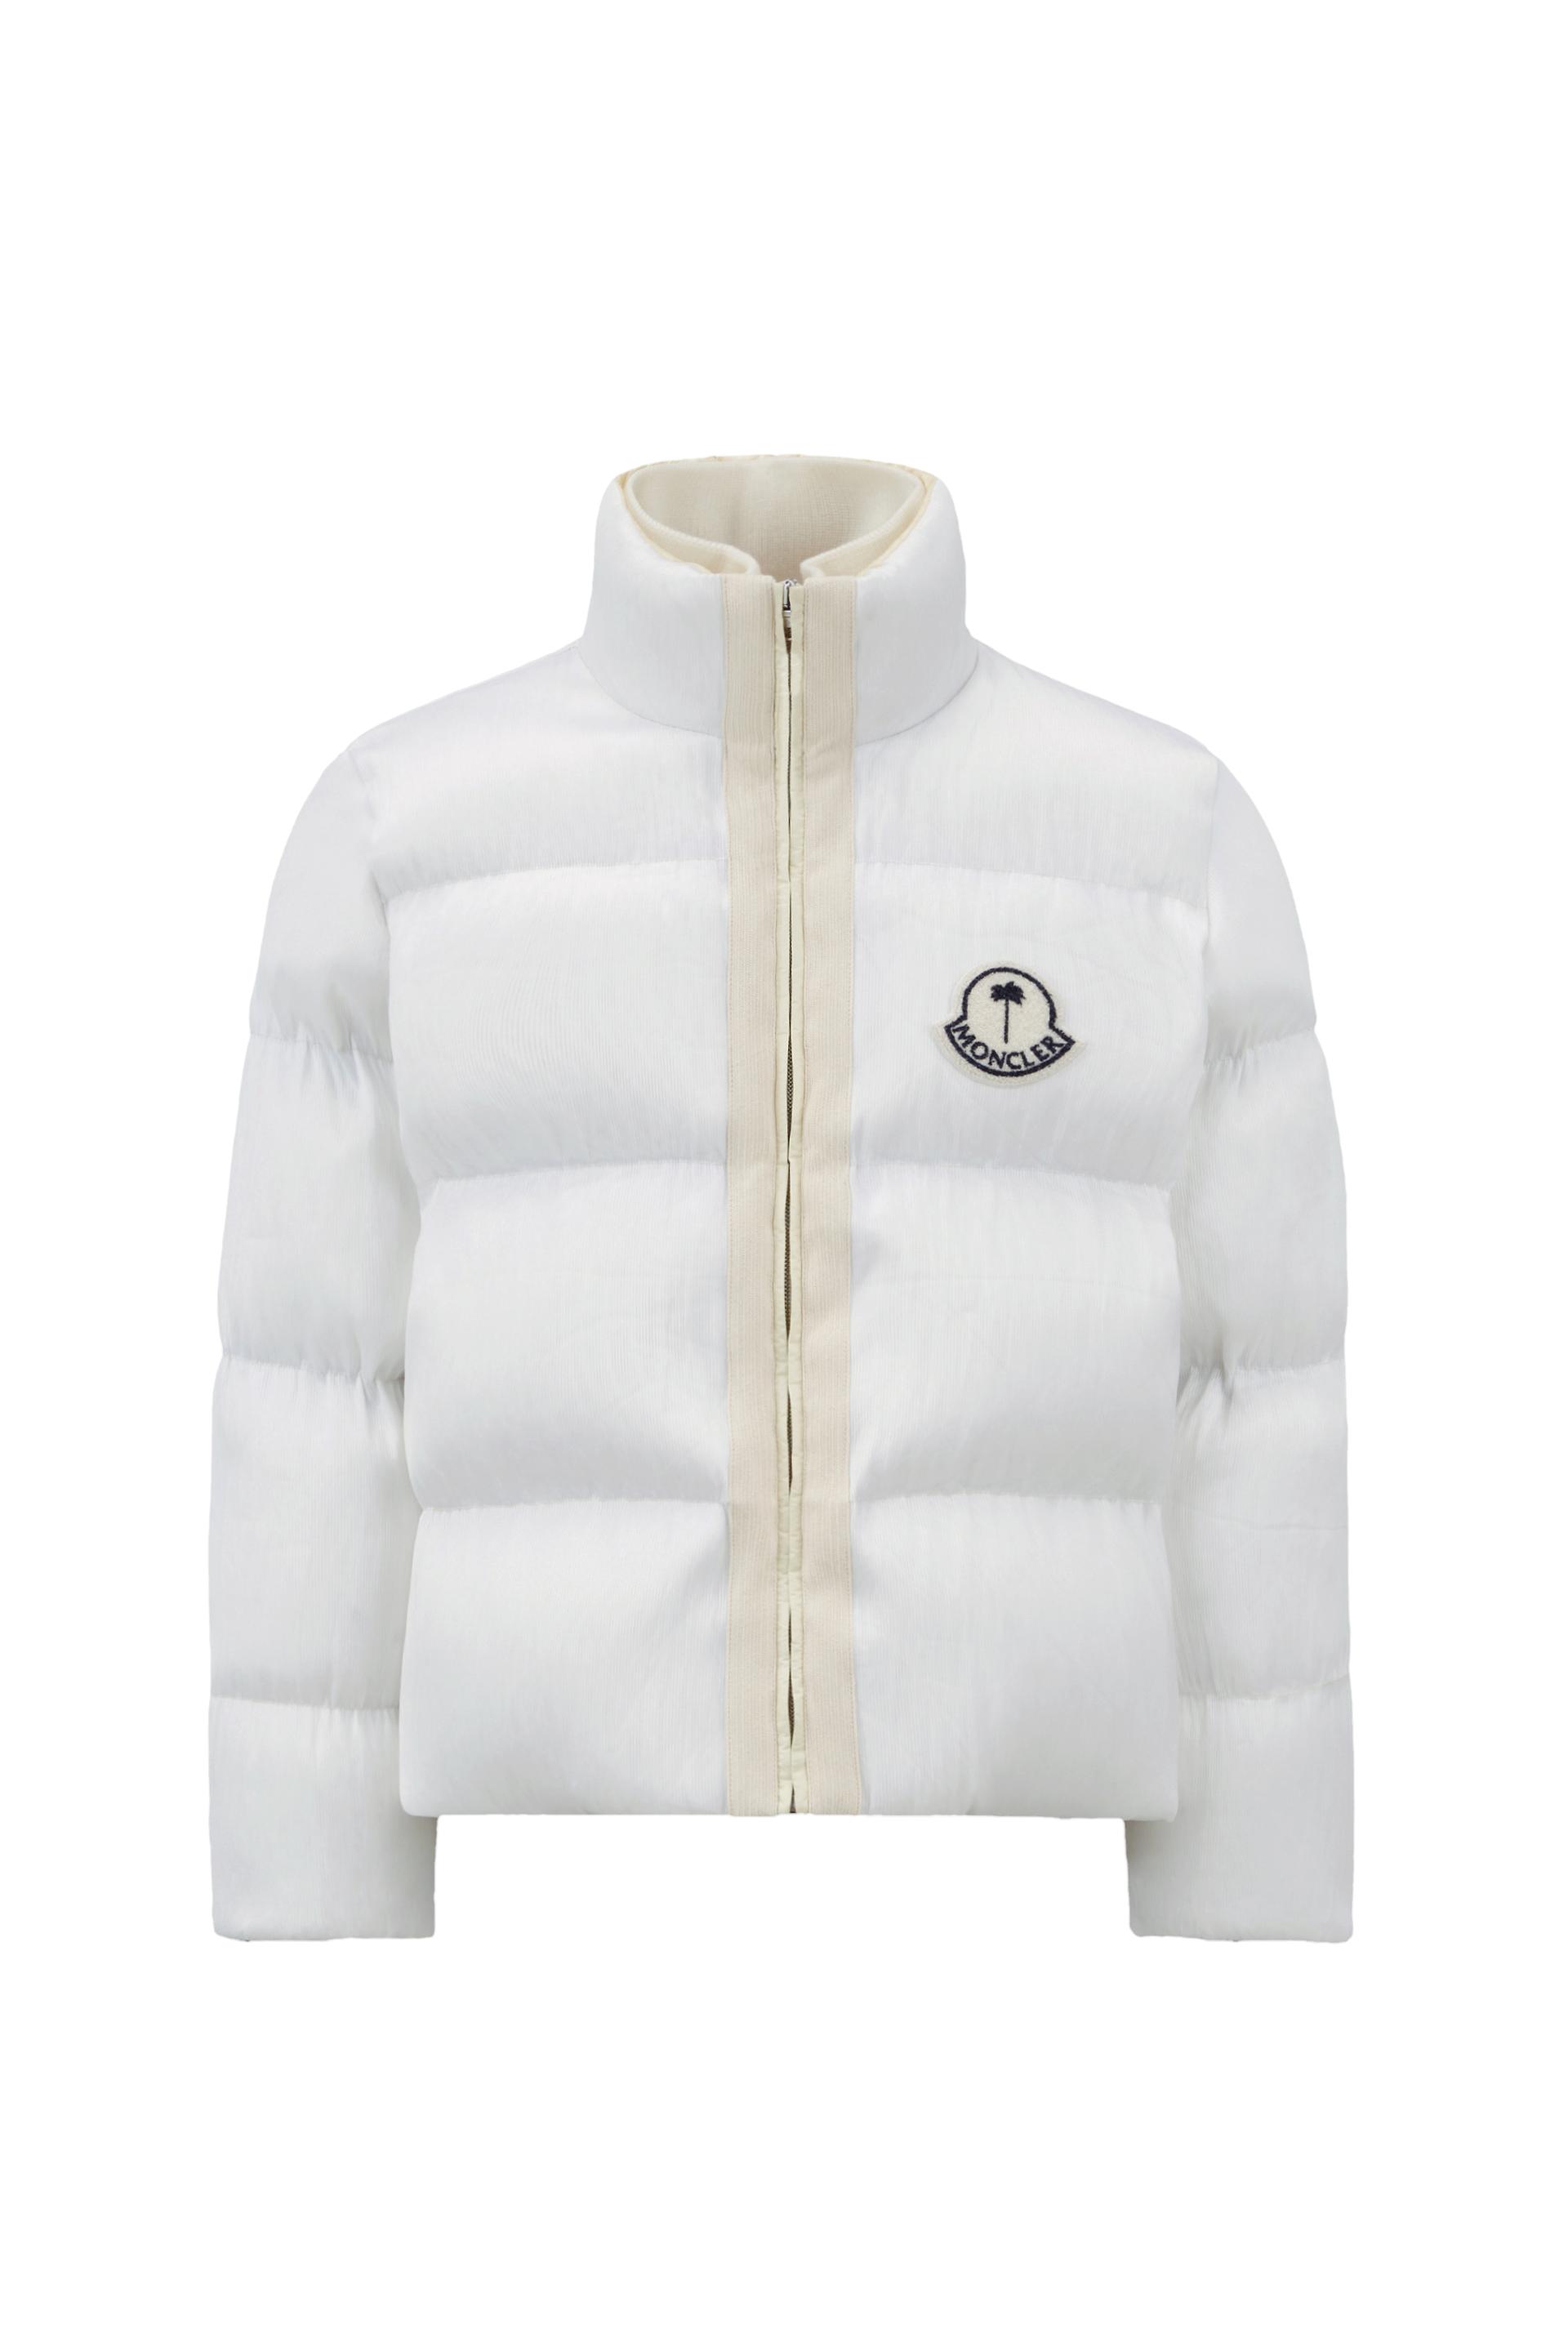 Moncler Maya 70 Collaborations Maya 70 By Palm Angels in White | Lyst